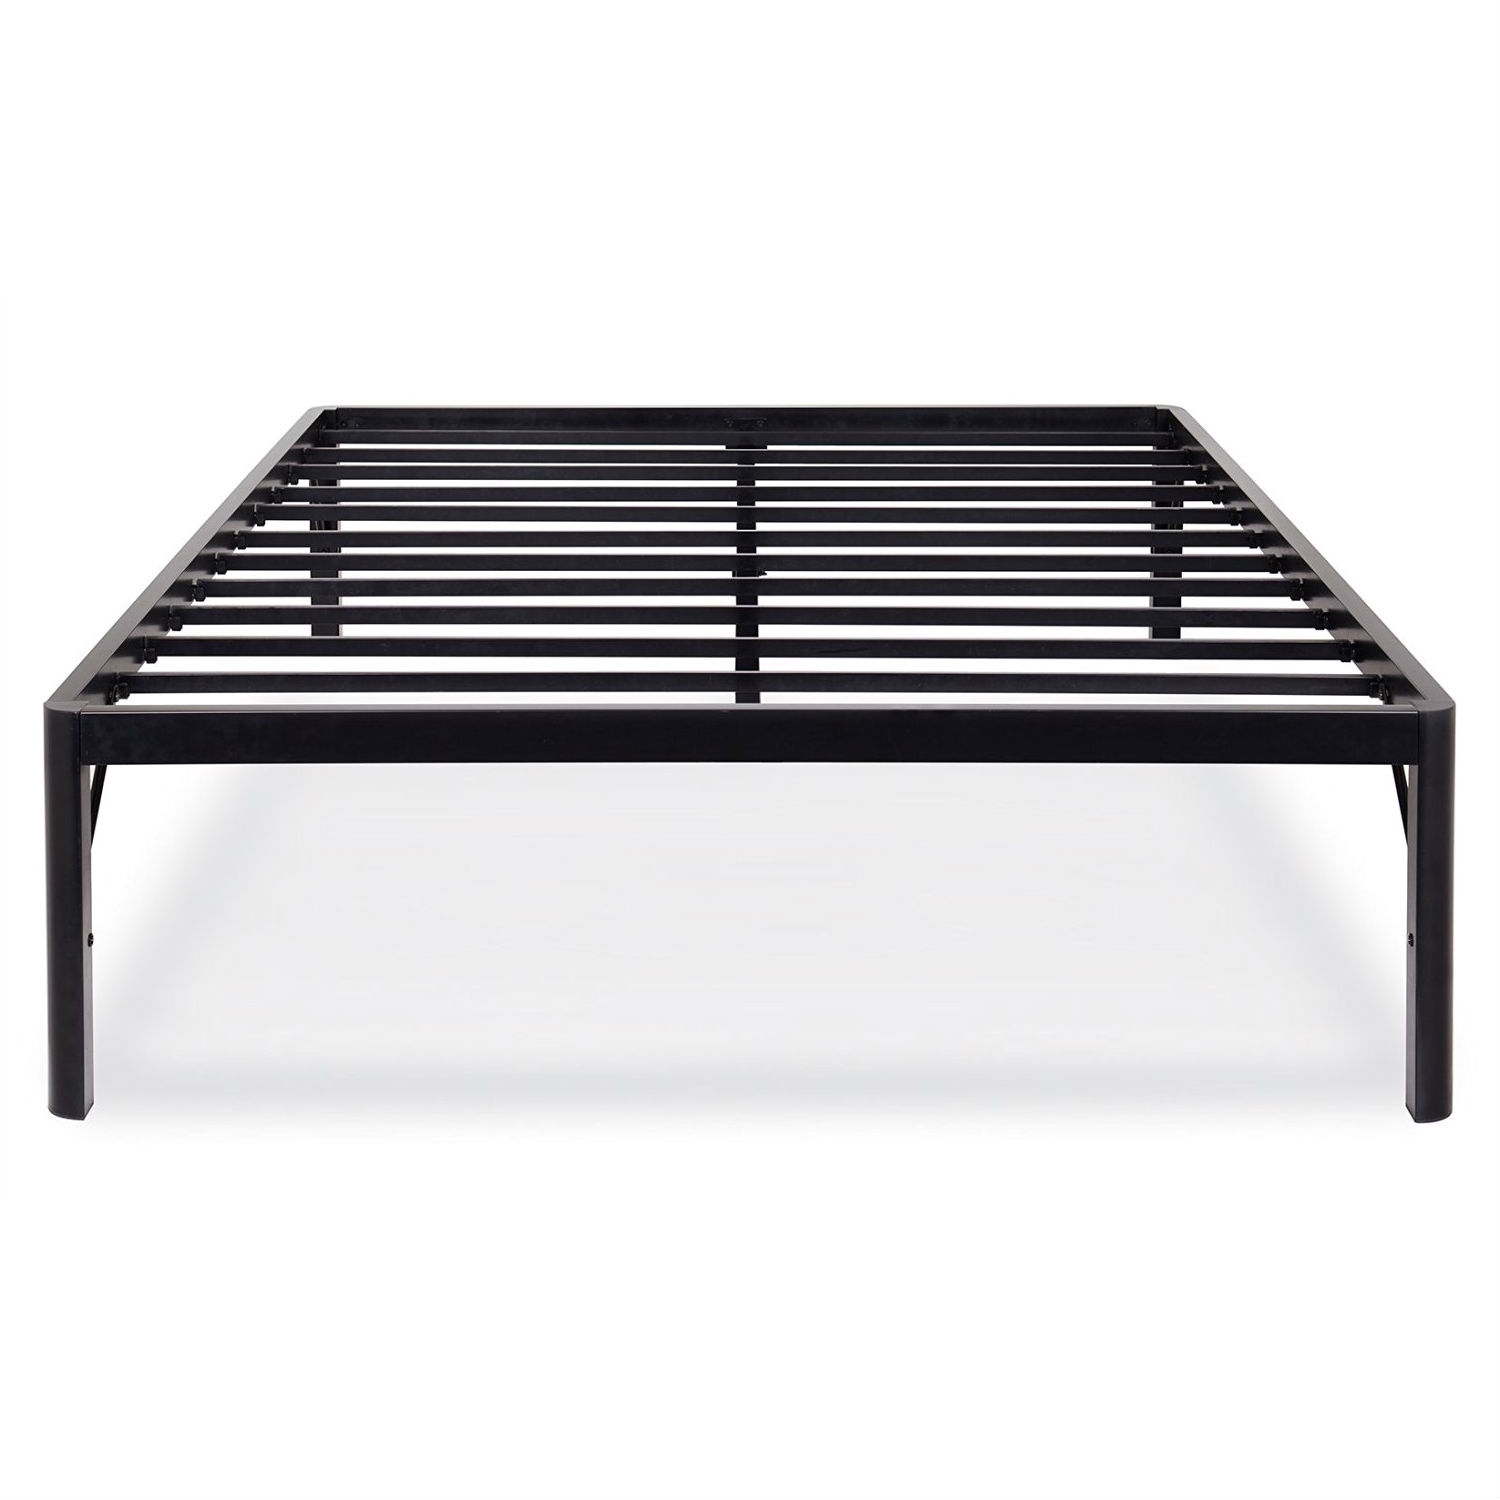 Twin size 18-inch High Rise Round Edge Metal Platform Bed Frame